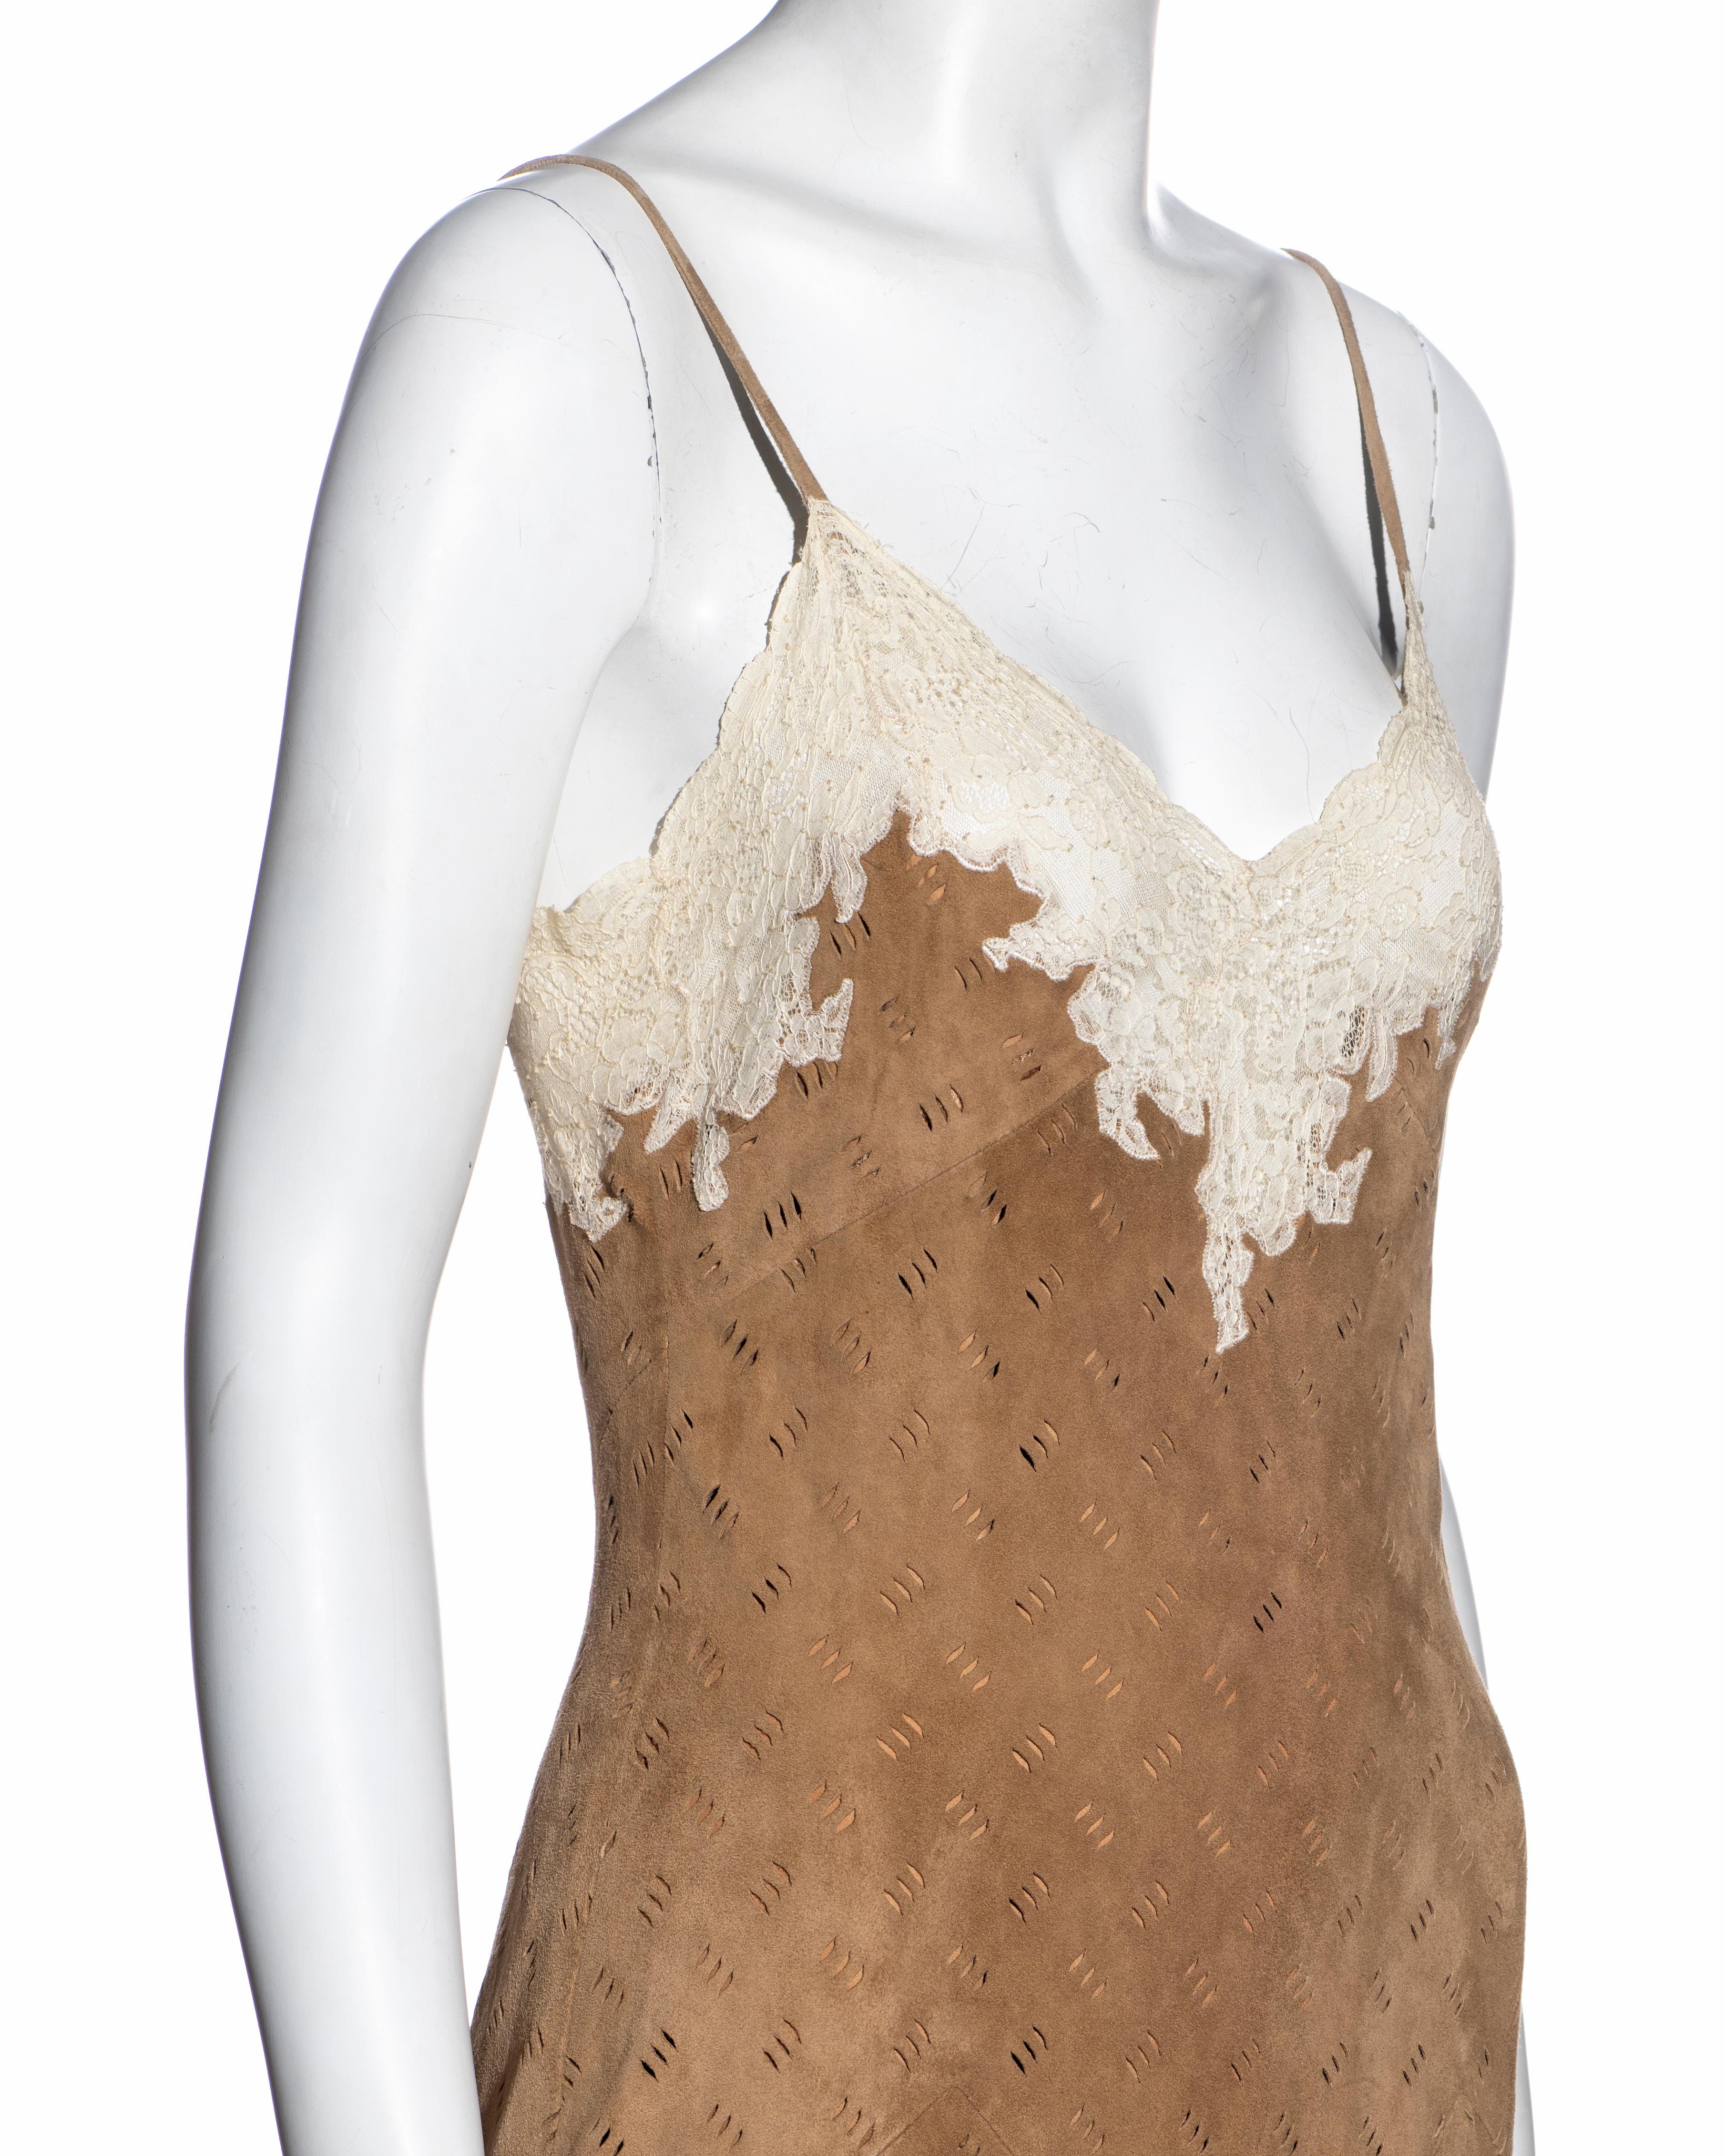 Christian Dior by John Galliano Brown and Cream Suede and Lace Dress, FW 1999 For Sale 3